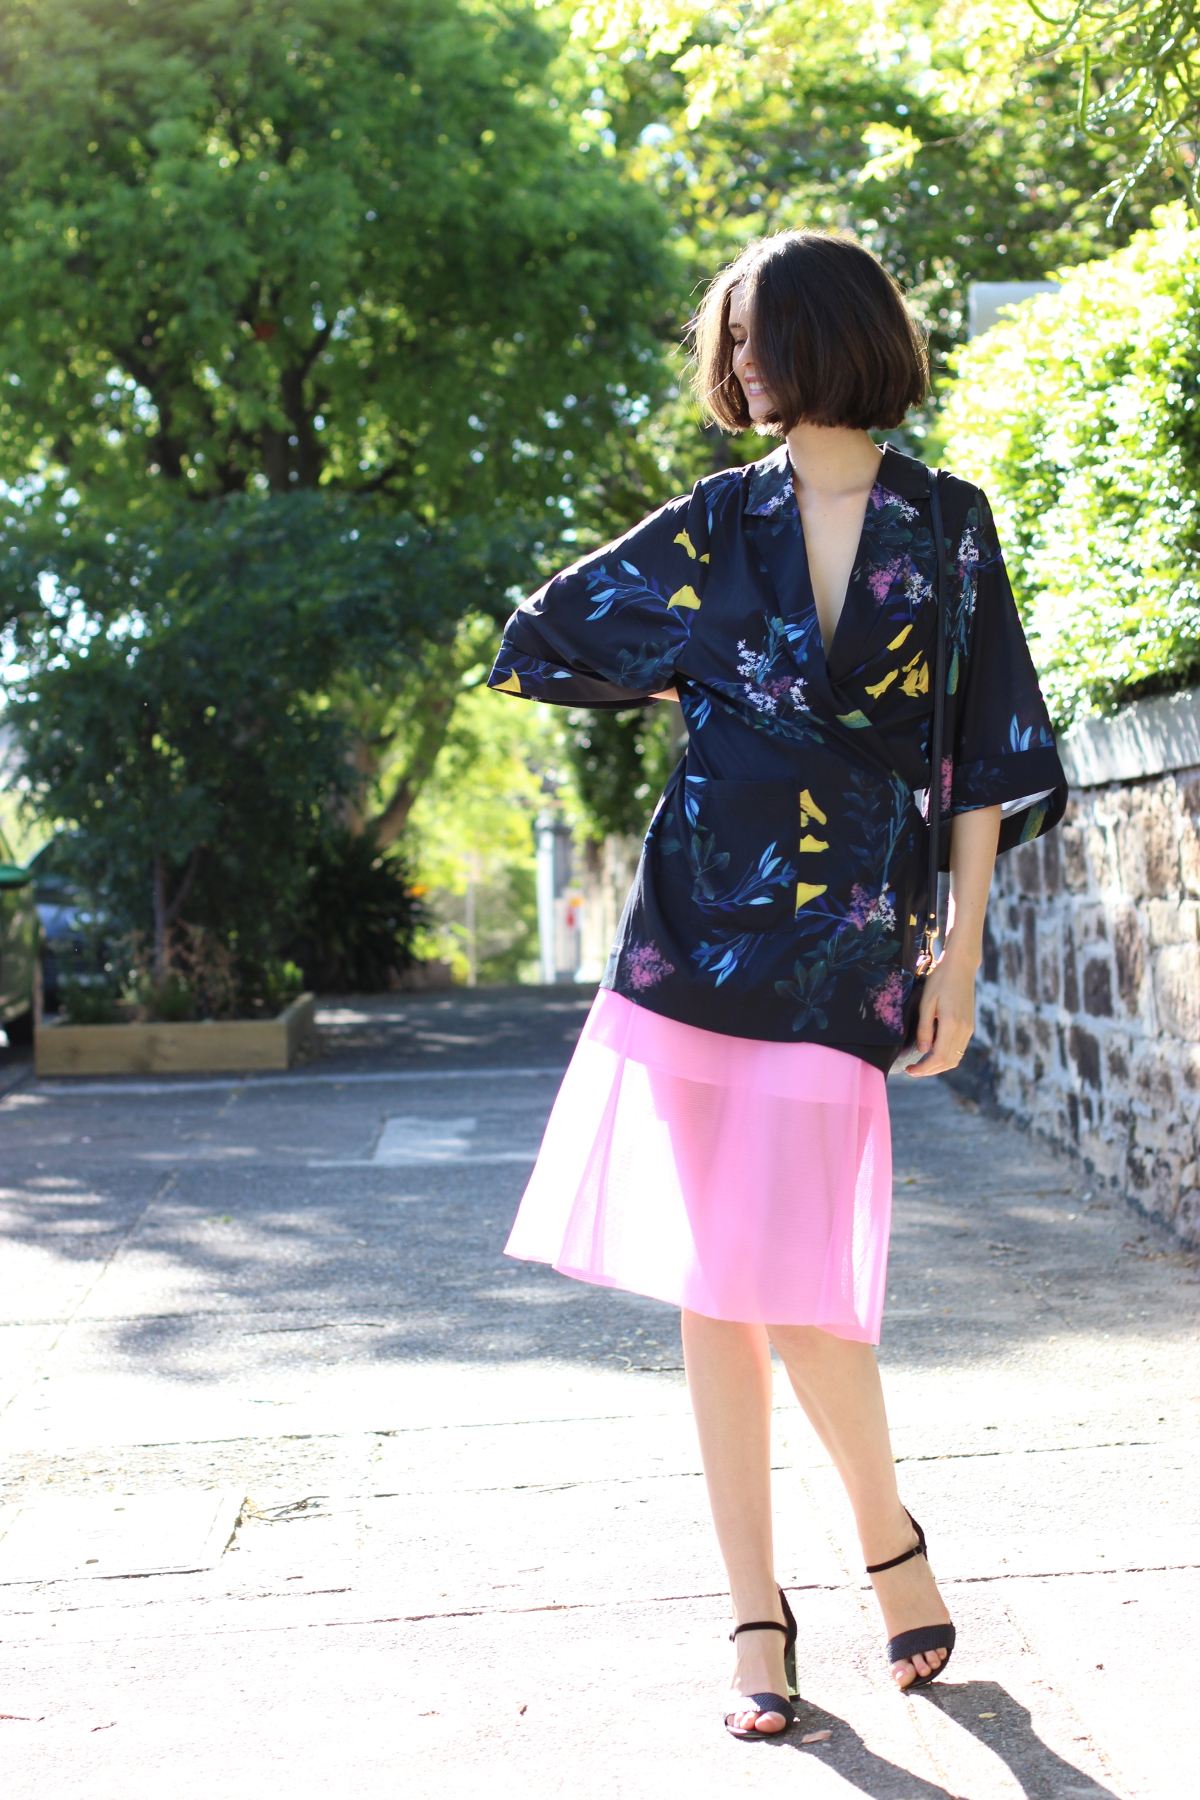 BYCHILL FASHION BLOG Chloe Hill Wearing Ruby Sees all floral kimono, Life with bird pink mesh midi skirt and dries van noten metallic and navy heels